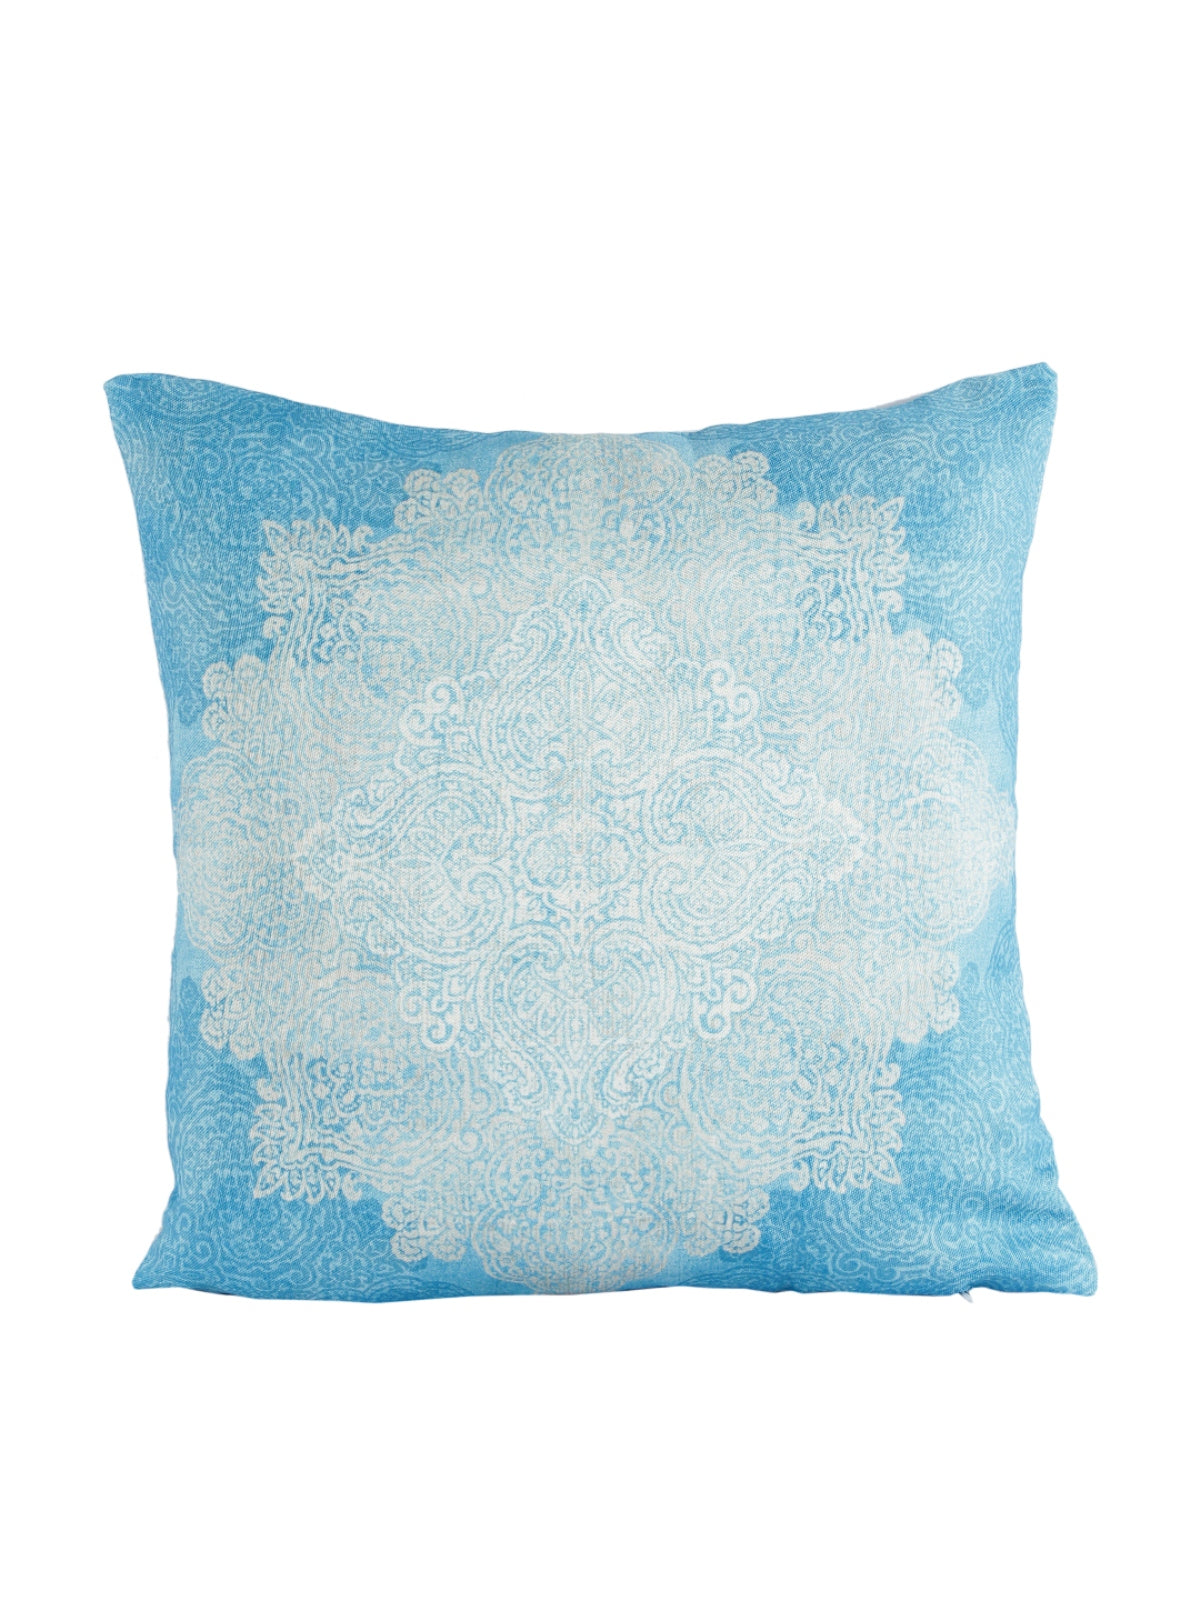 Ethnic Motifs Polyester Cushion Cover 16x16 Inch, Set of 5 - Turquoise Blue